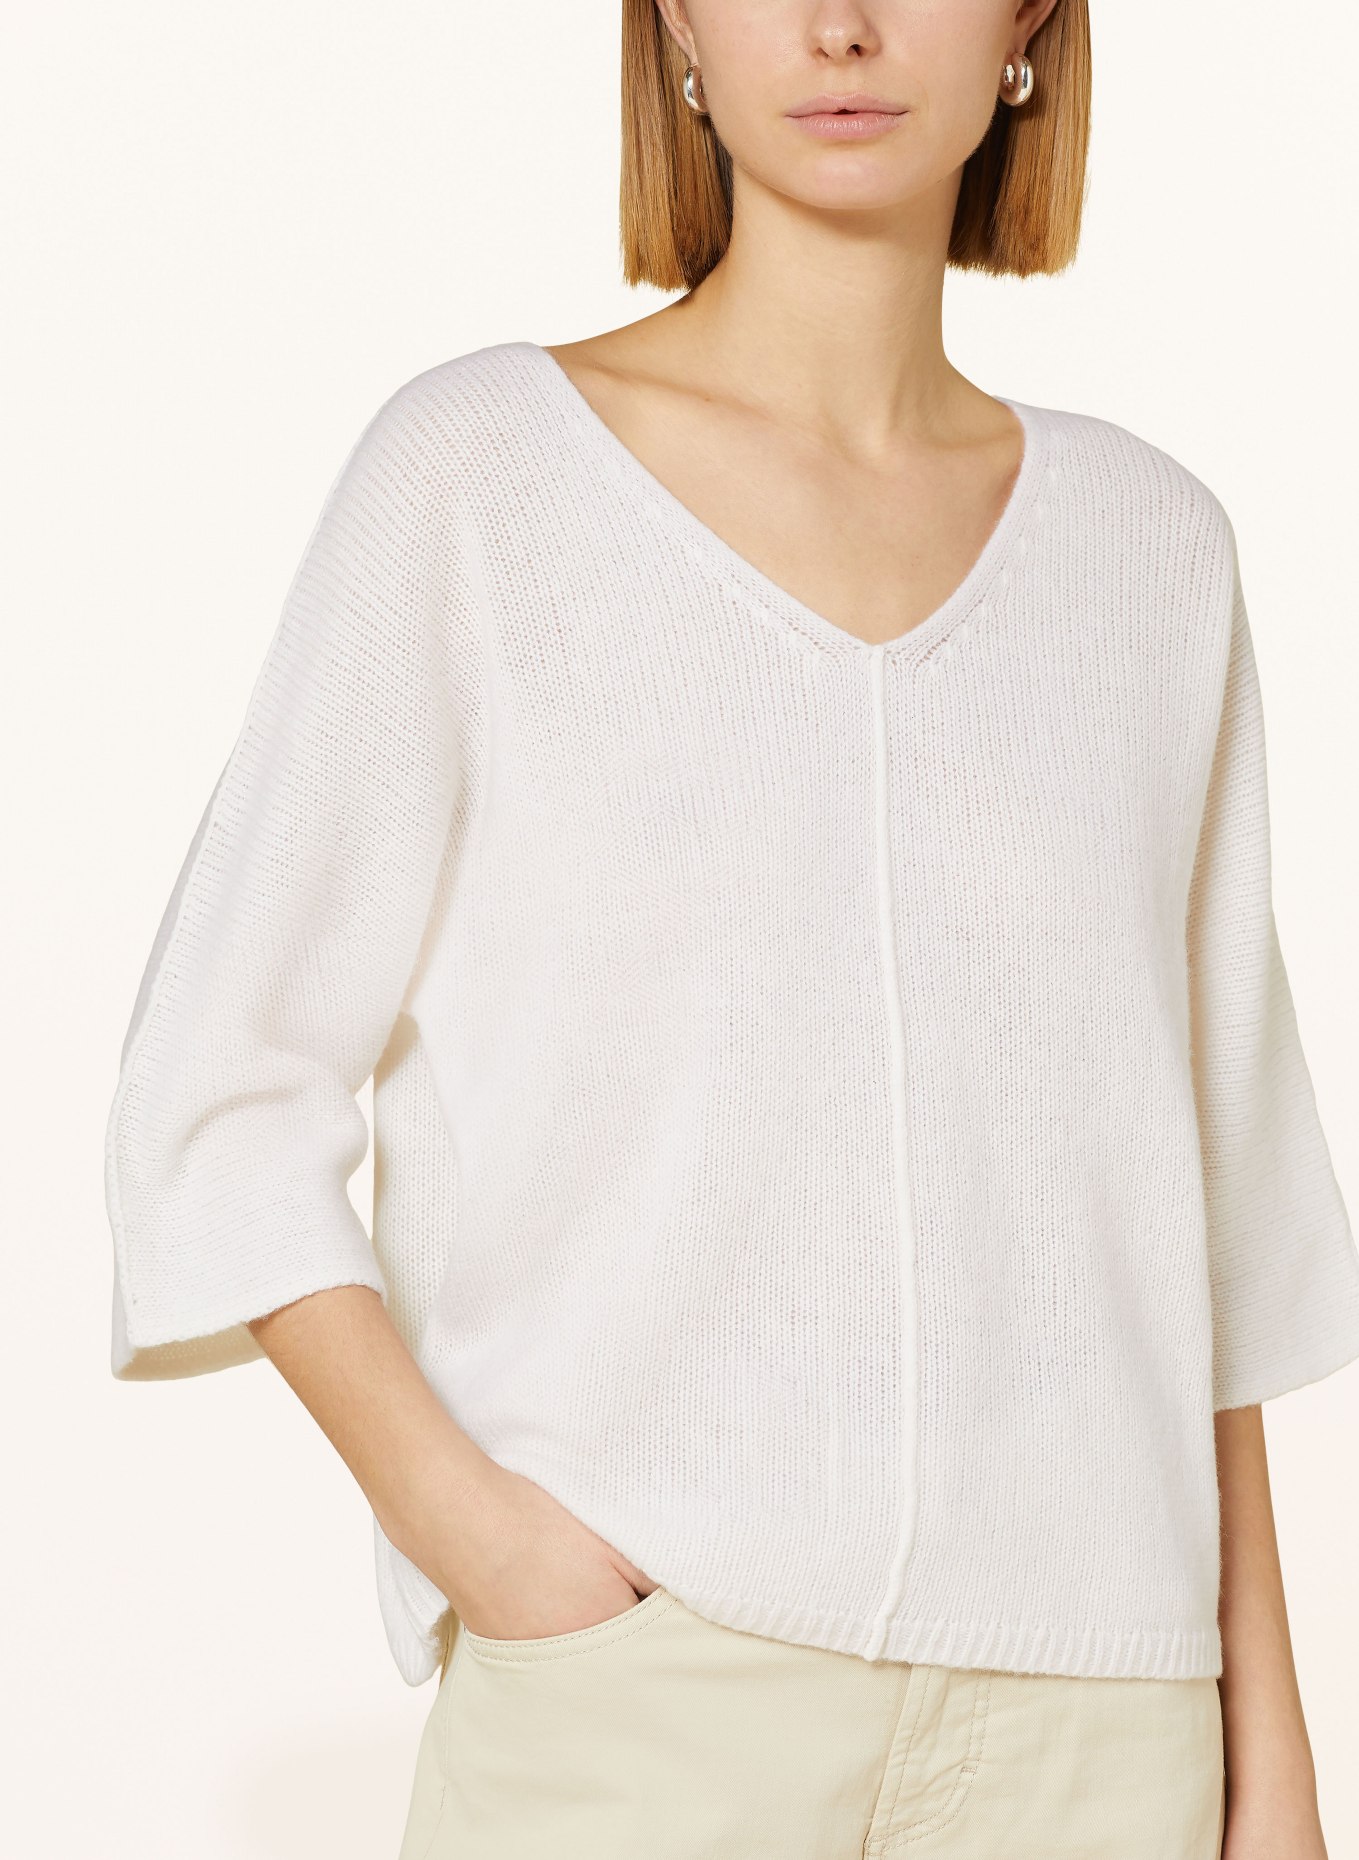 FFC Sweater with cashmere and 3/4 sleeves, Color: ECRU (Image 4)